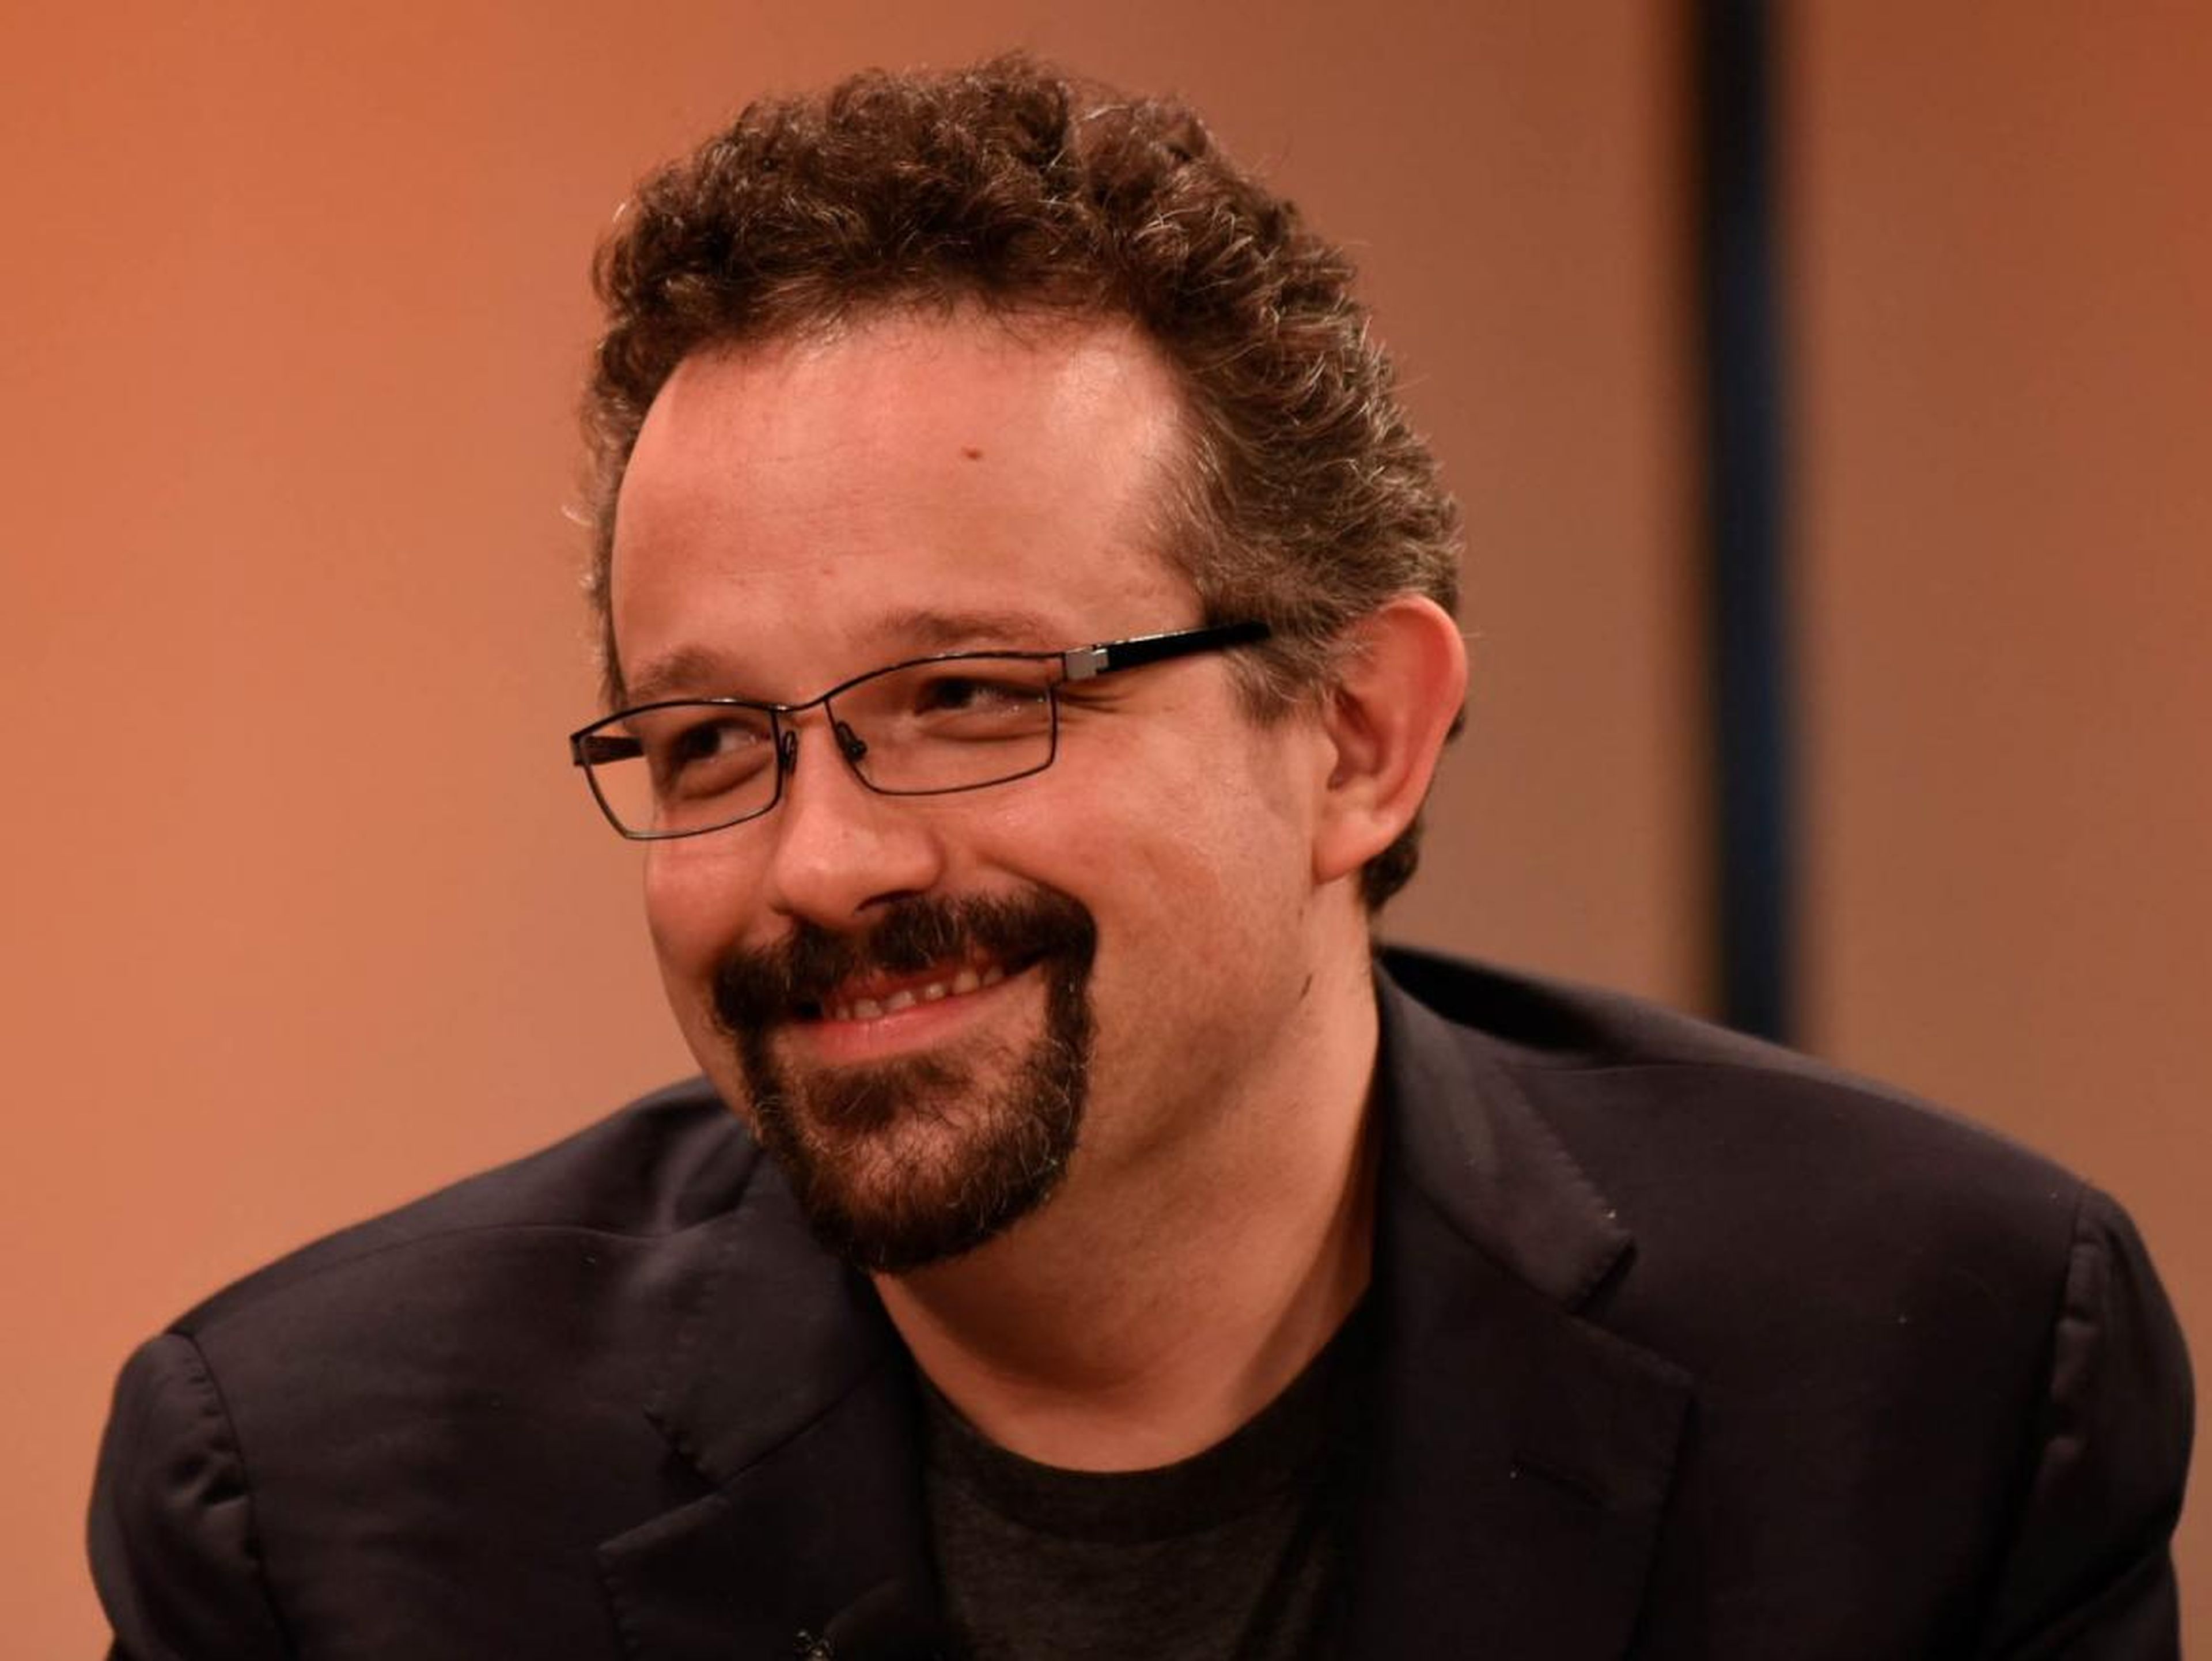 Evernote cofounder Phil Libin also served as its CEO from 2007 until 2015.